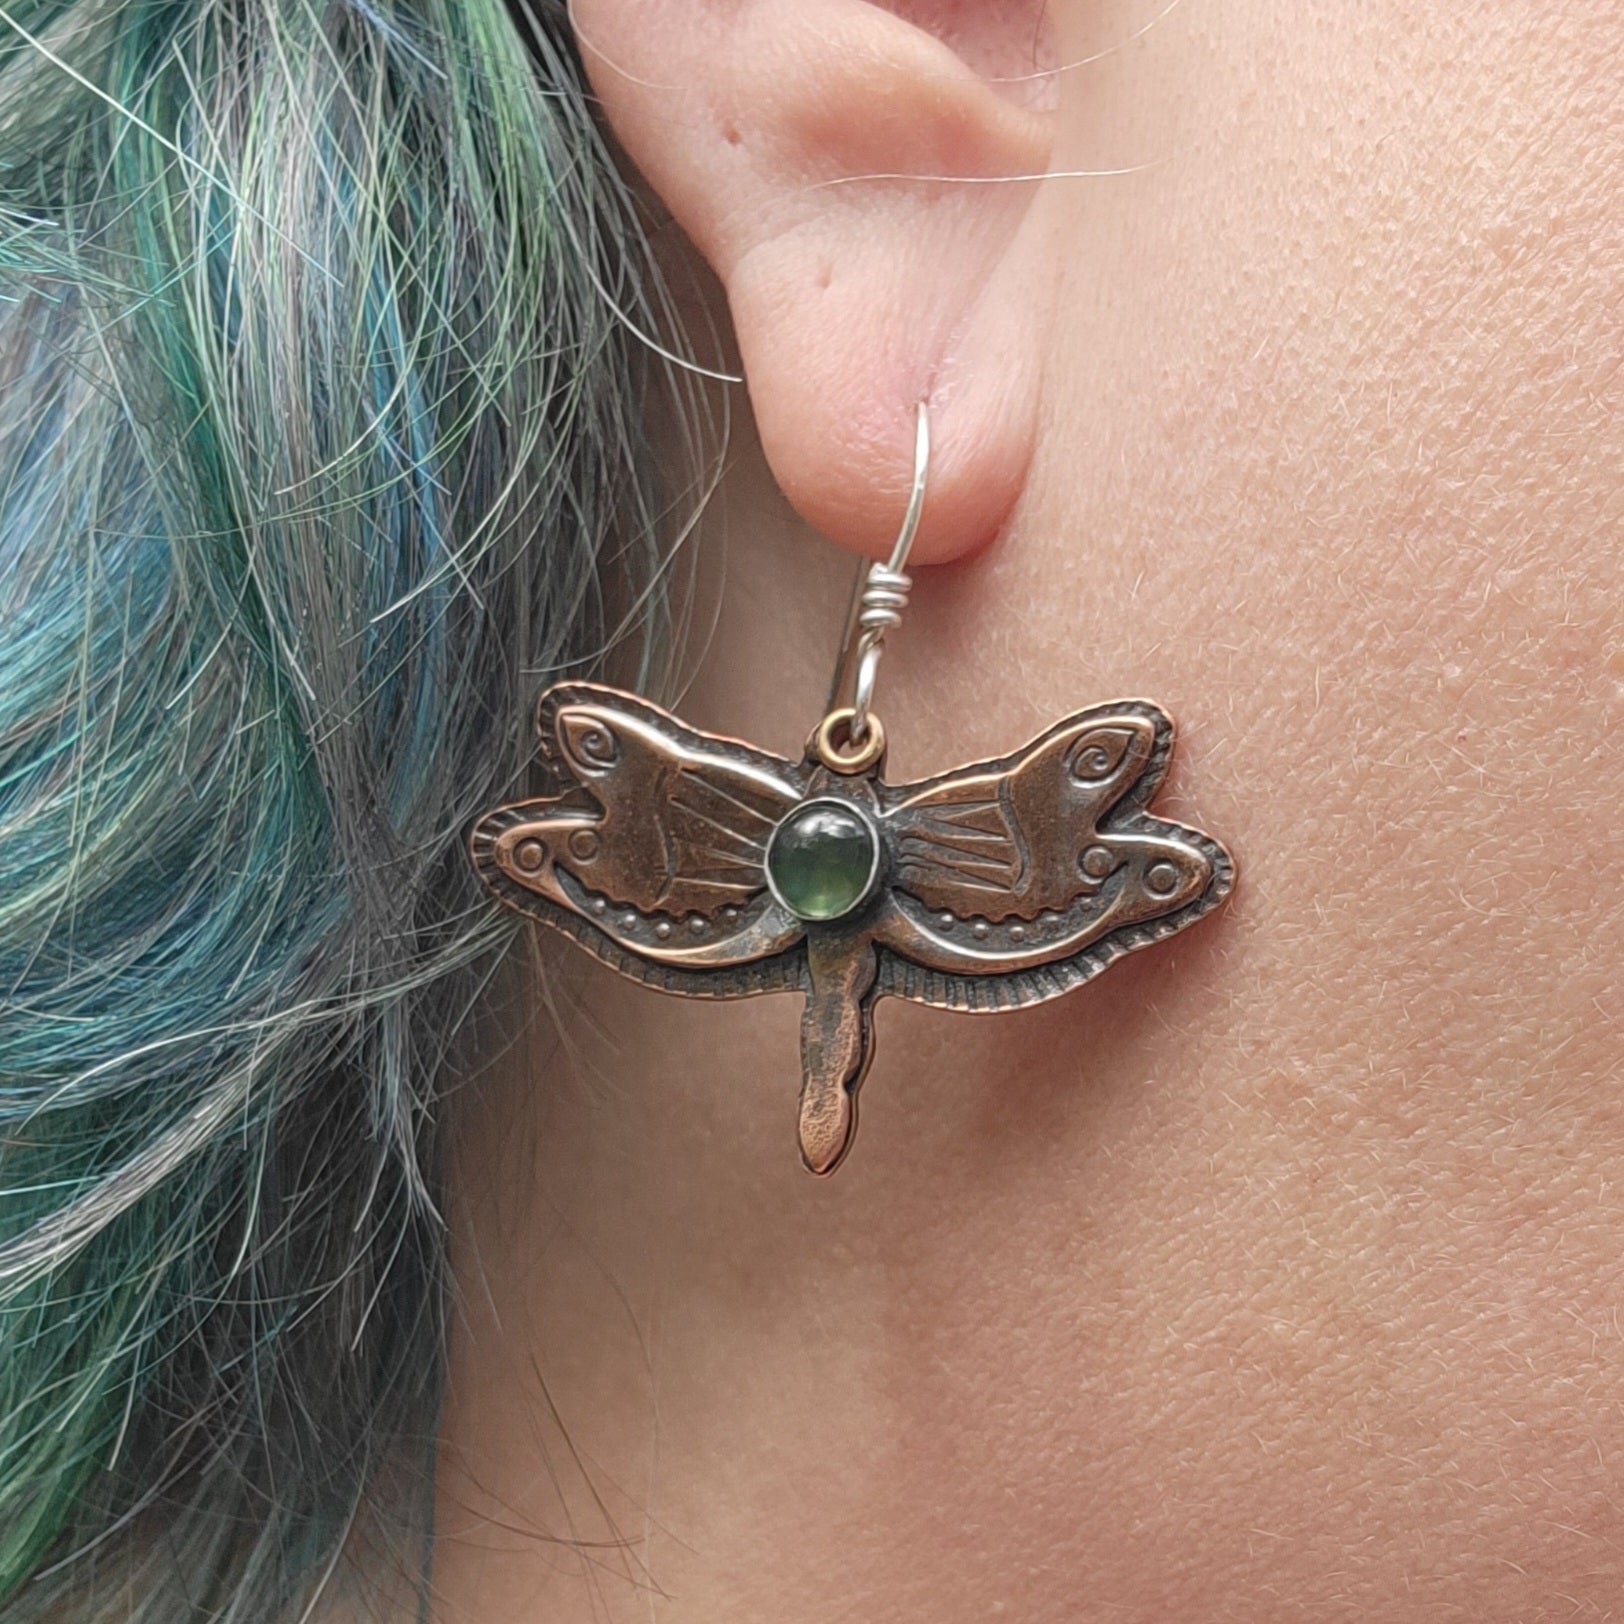 Copper Dragonfly Earrings with Green Serpentine